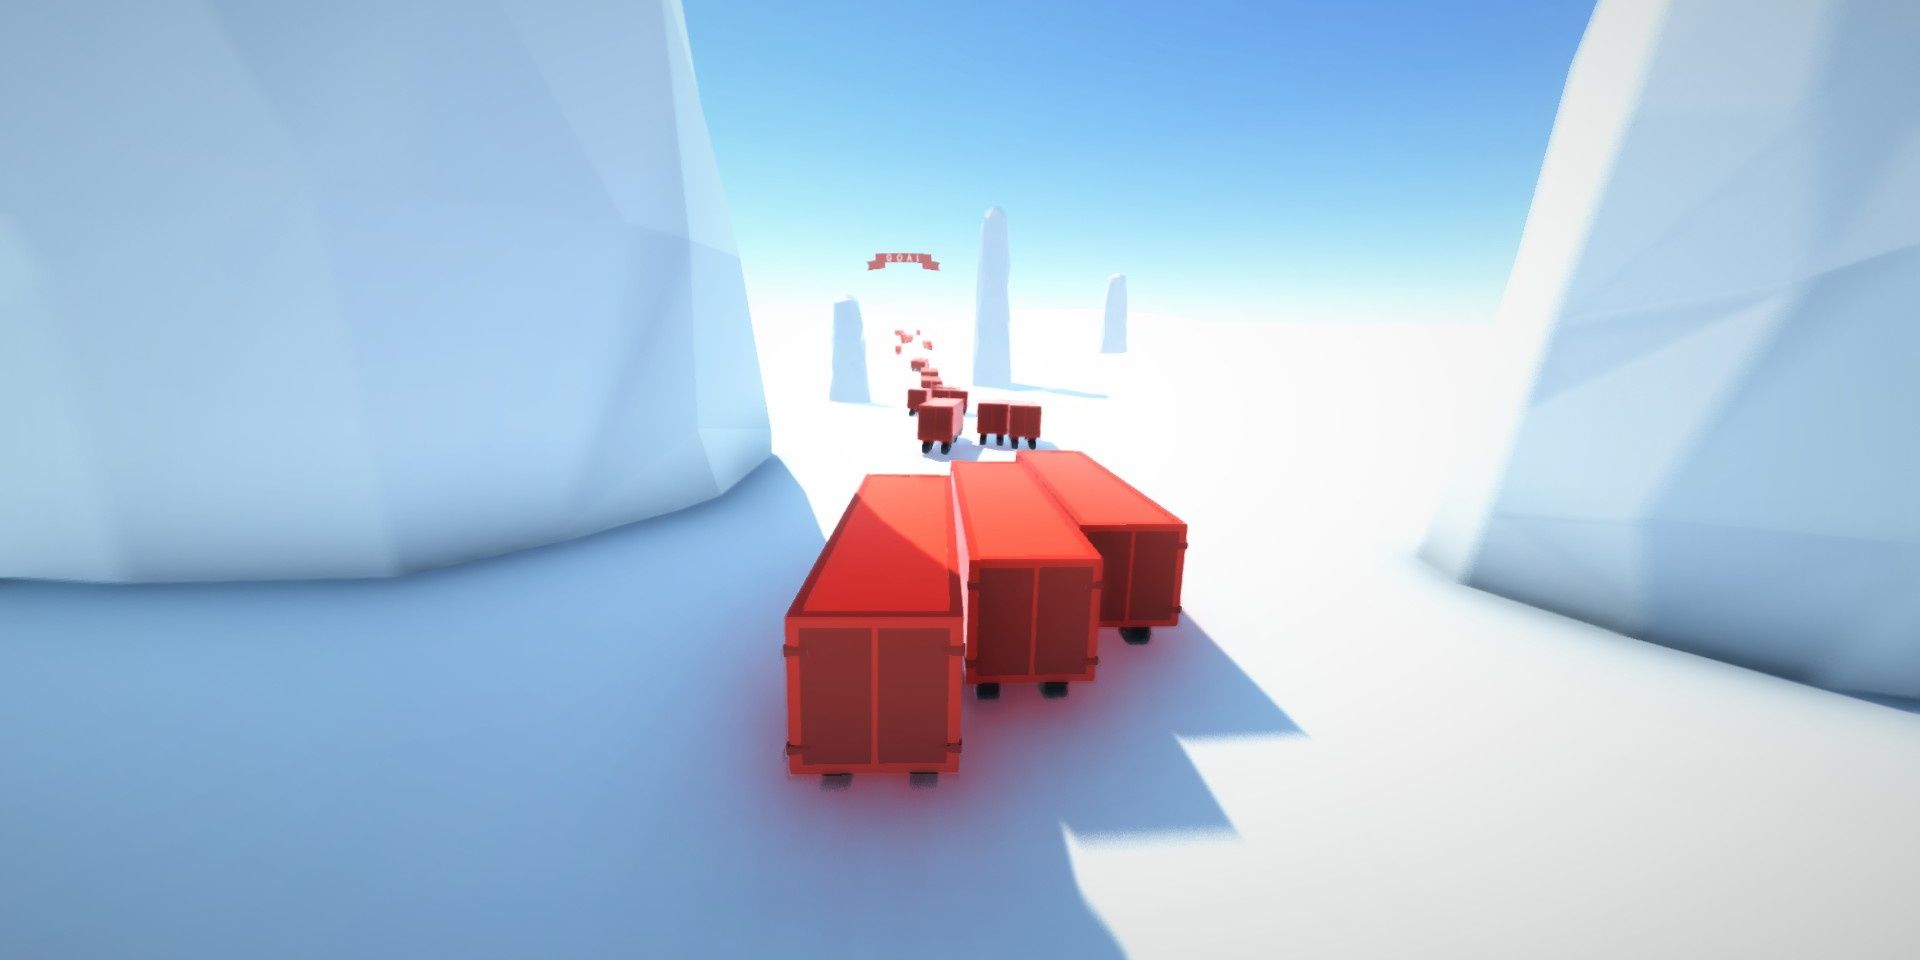 Red trucks in a white environment as part of SUPERTRUCK mode in Clustertruck